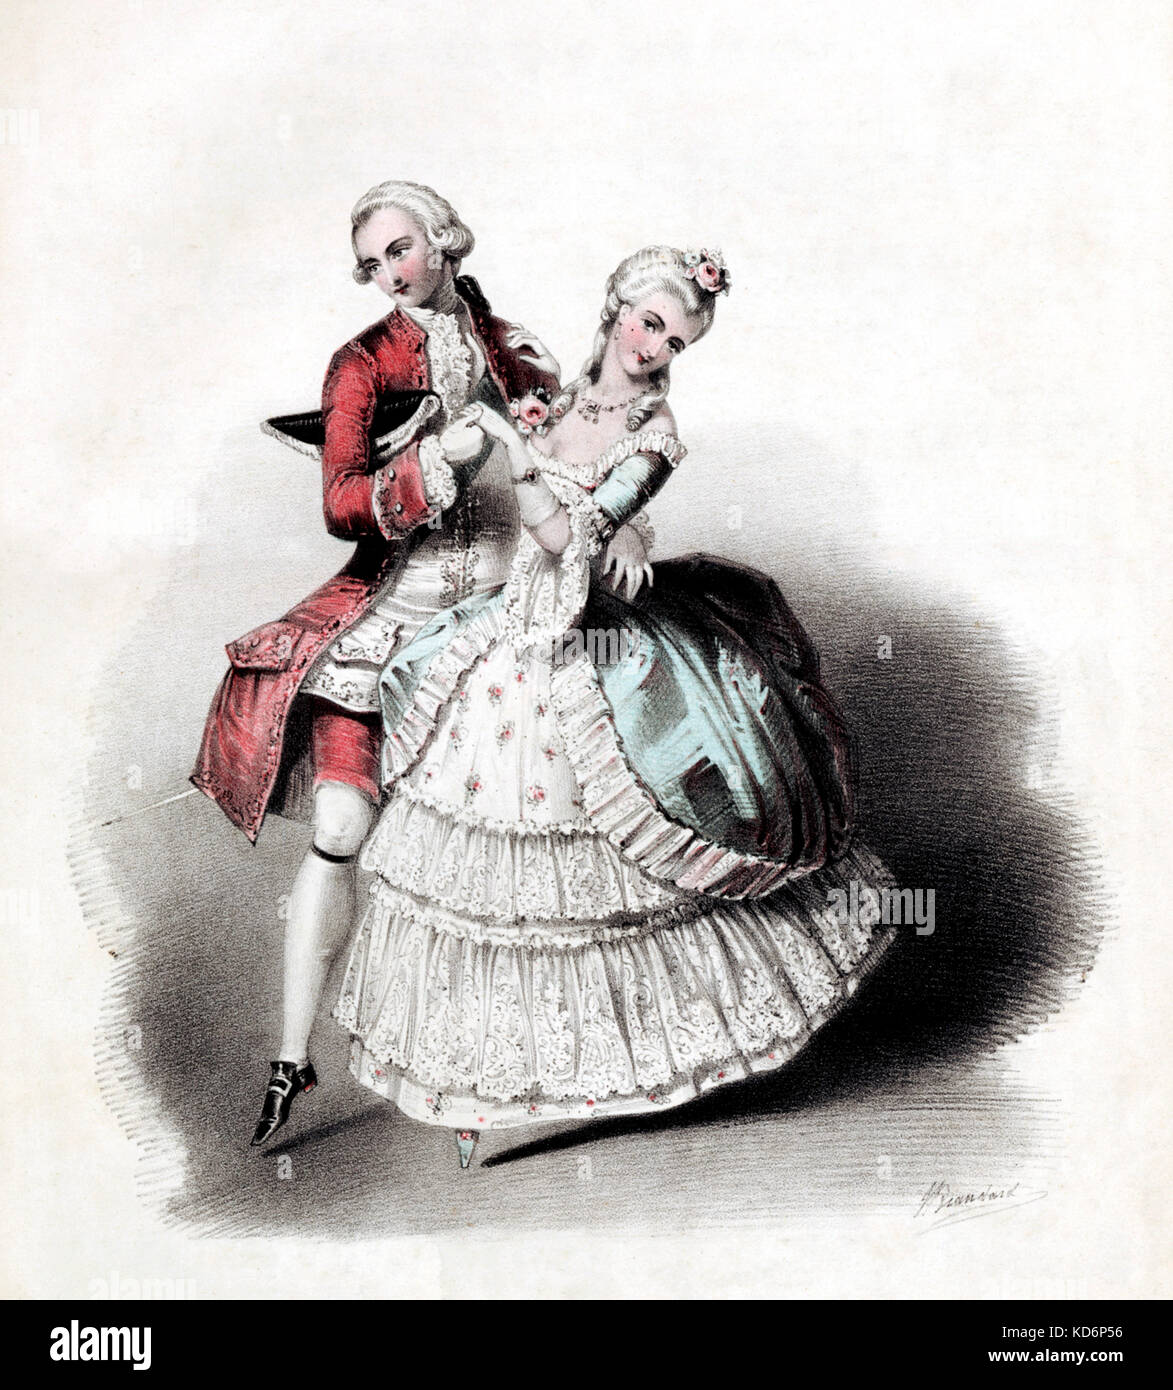 The Minuet Quadrille composed for the Court Balls and respectfully dedicated to the Countess of Jersey by Julien.  Illustrated by Brandard. Court dance eighteenth century. Published by Julien, London. Man wearing wig, Shows steps. Stock Photo